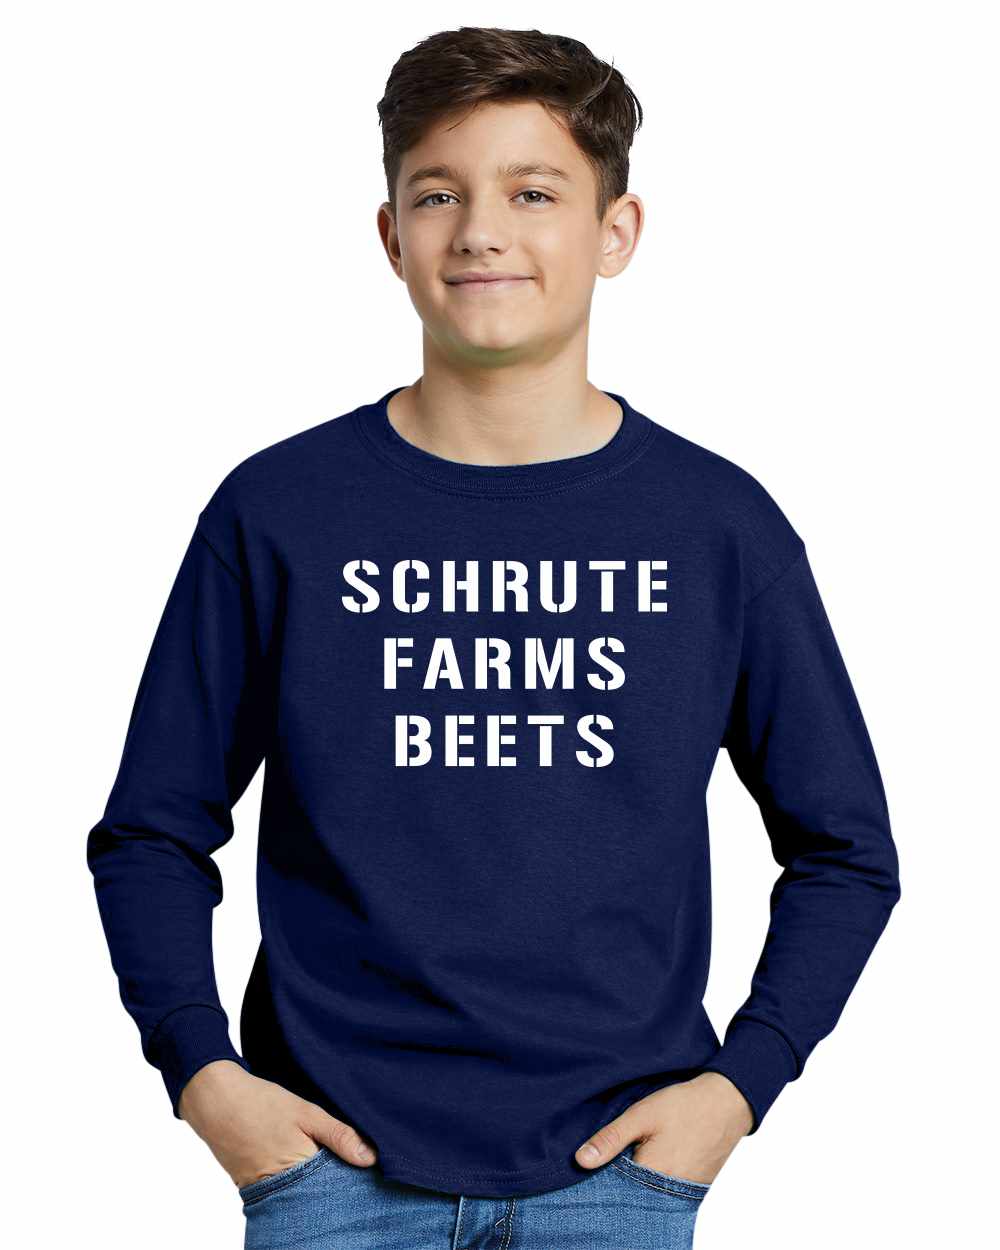 SCHRUTE FARMS BEETS on Youth Long Sleeve Shirt (#396-203)